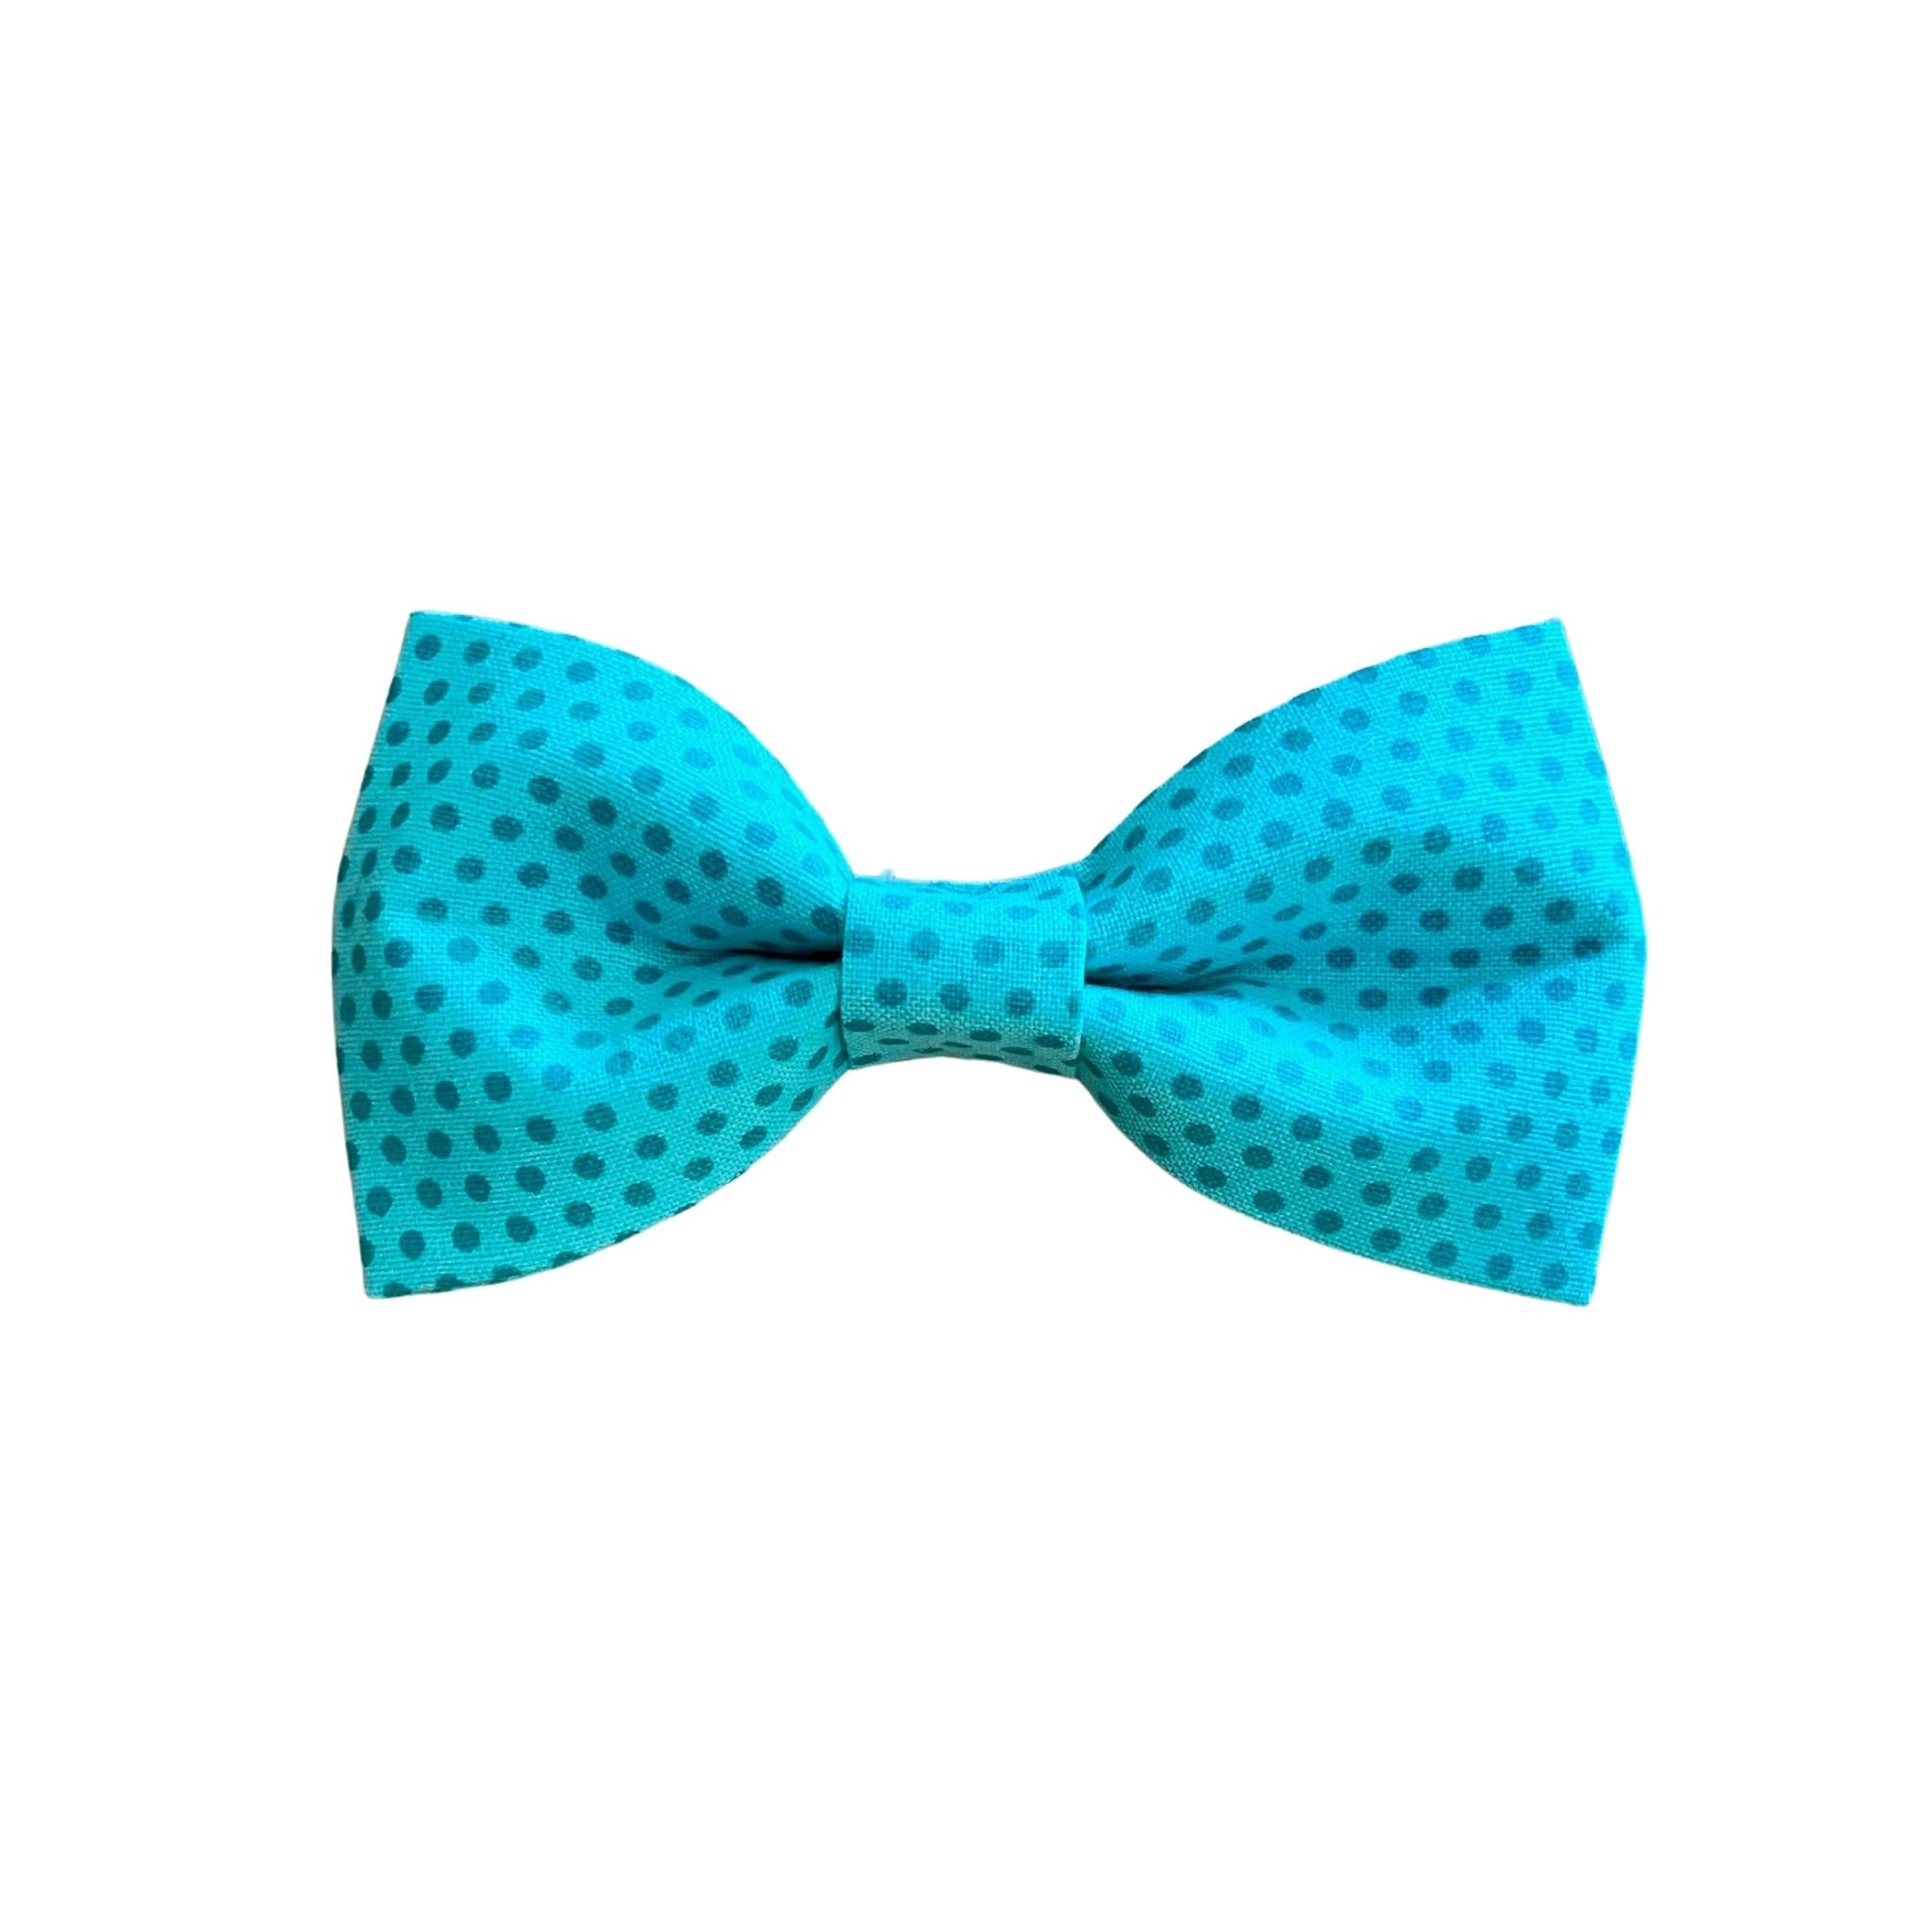 Aqua bow tie with small teal spots. 